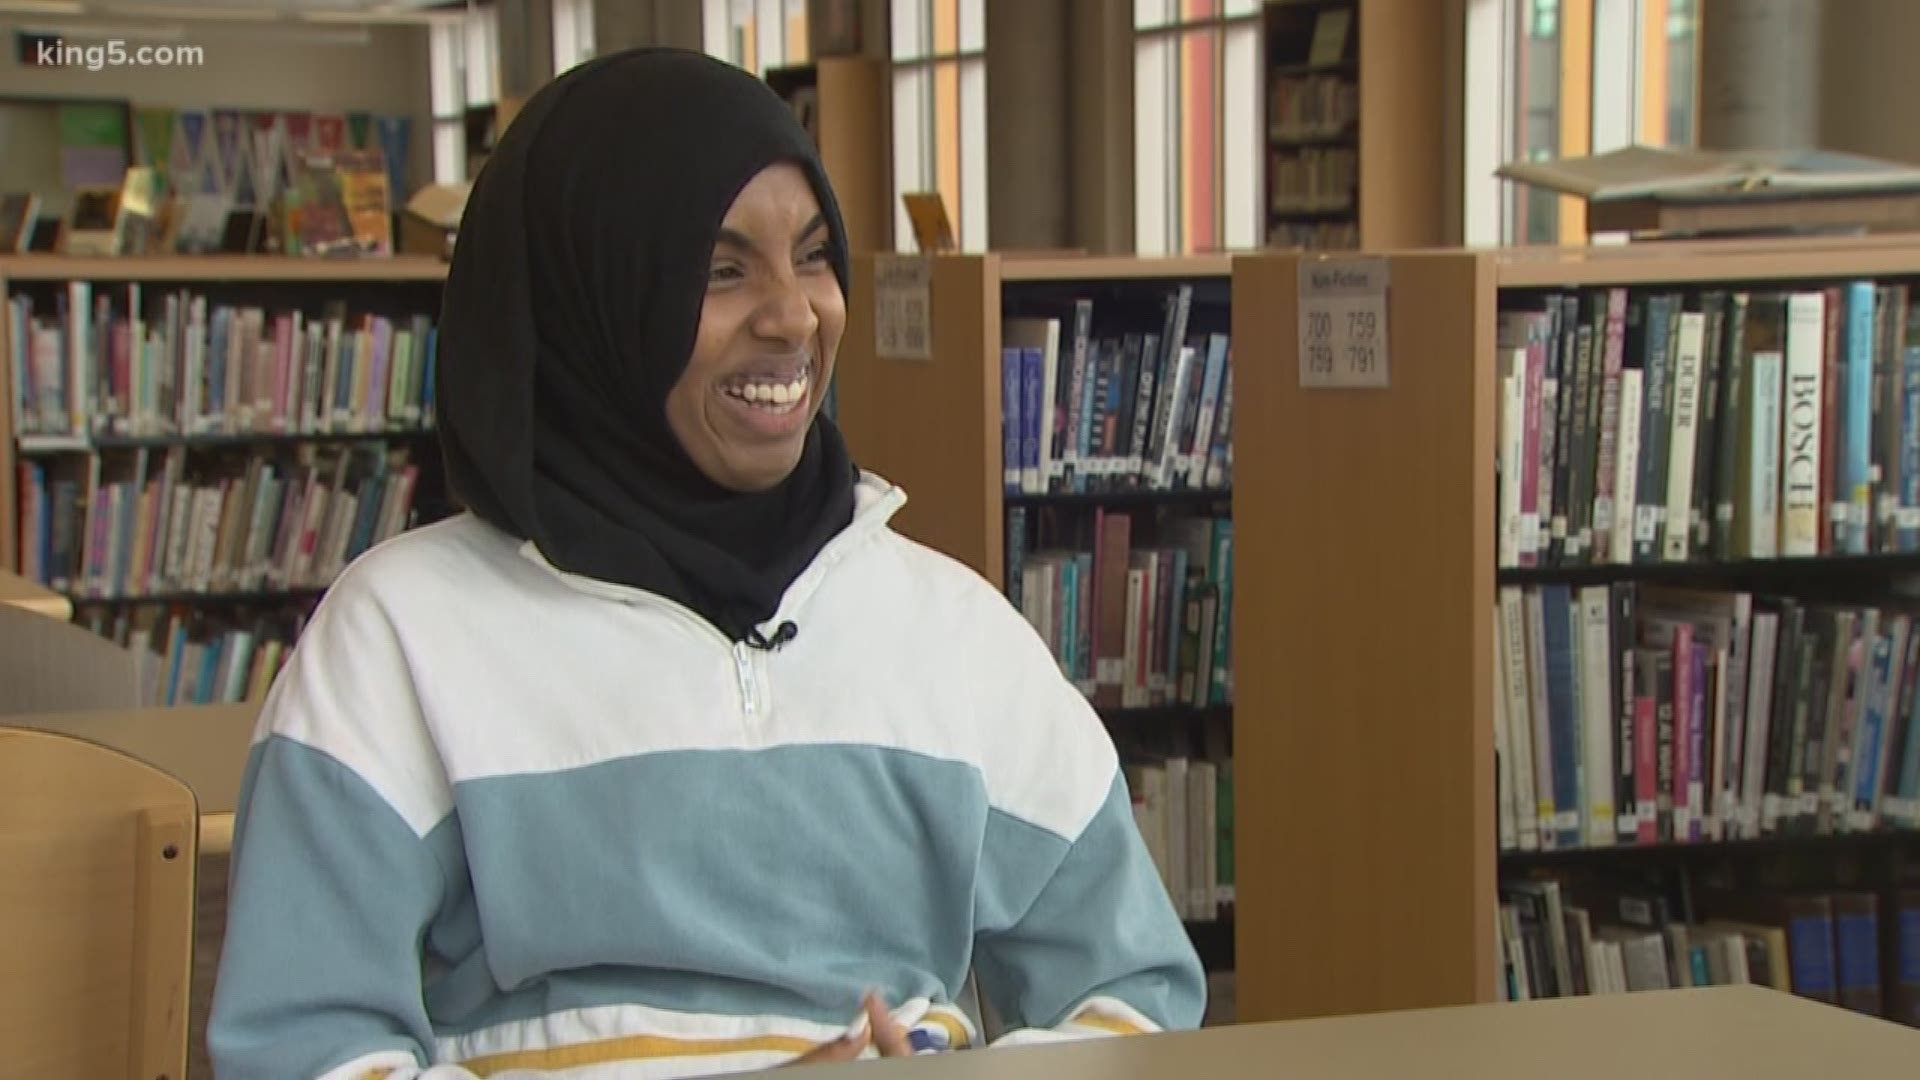 We want to to introduce you to a Shoreline High School student known for stirring up what she calls "Good Trouble" in her community. She's being honored by Princeton University for her work fighting racism. KING 5's Eric Wilkinson reports.